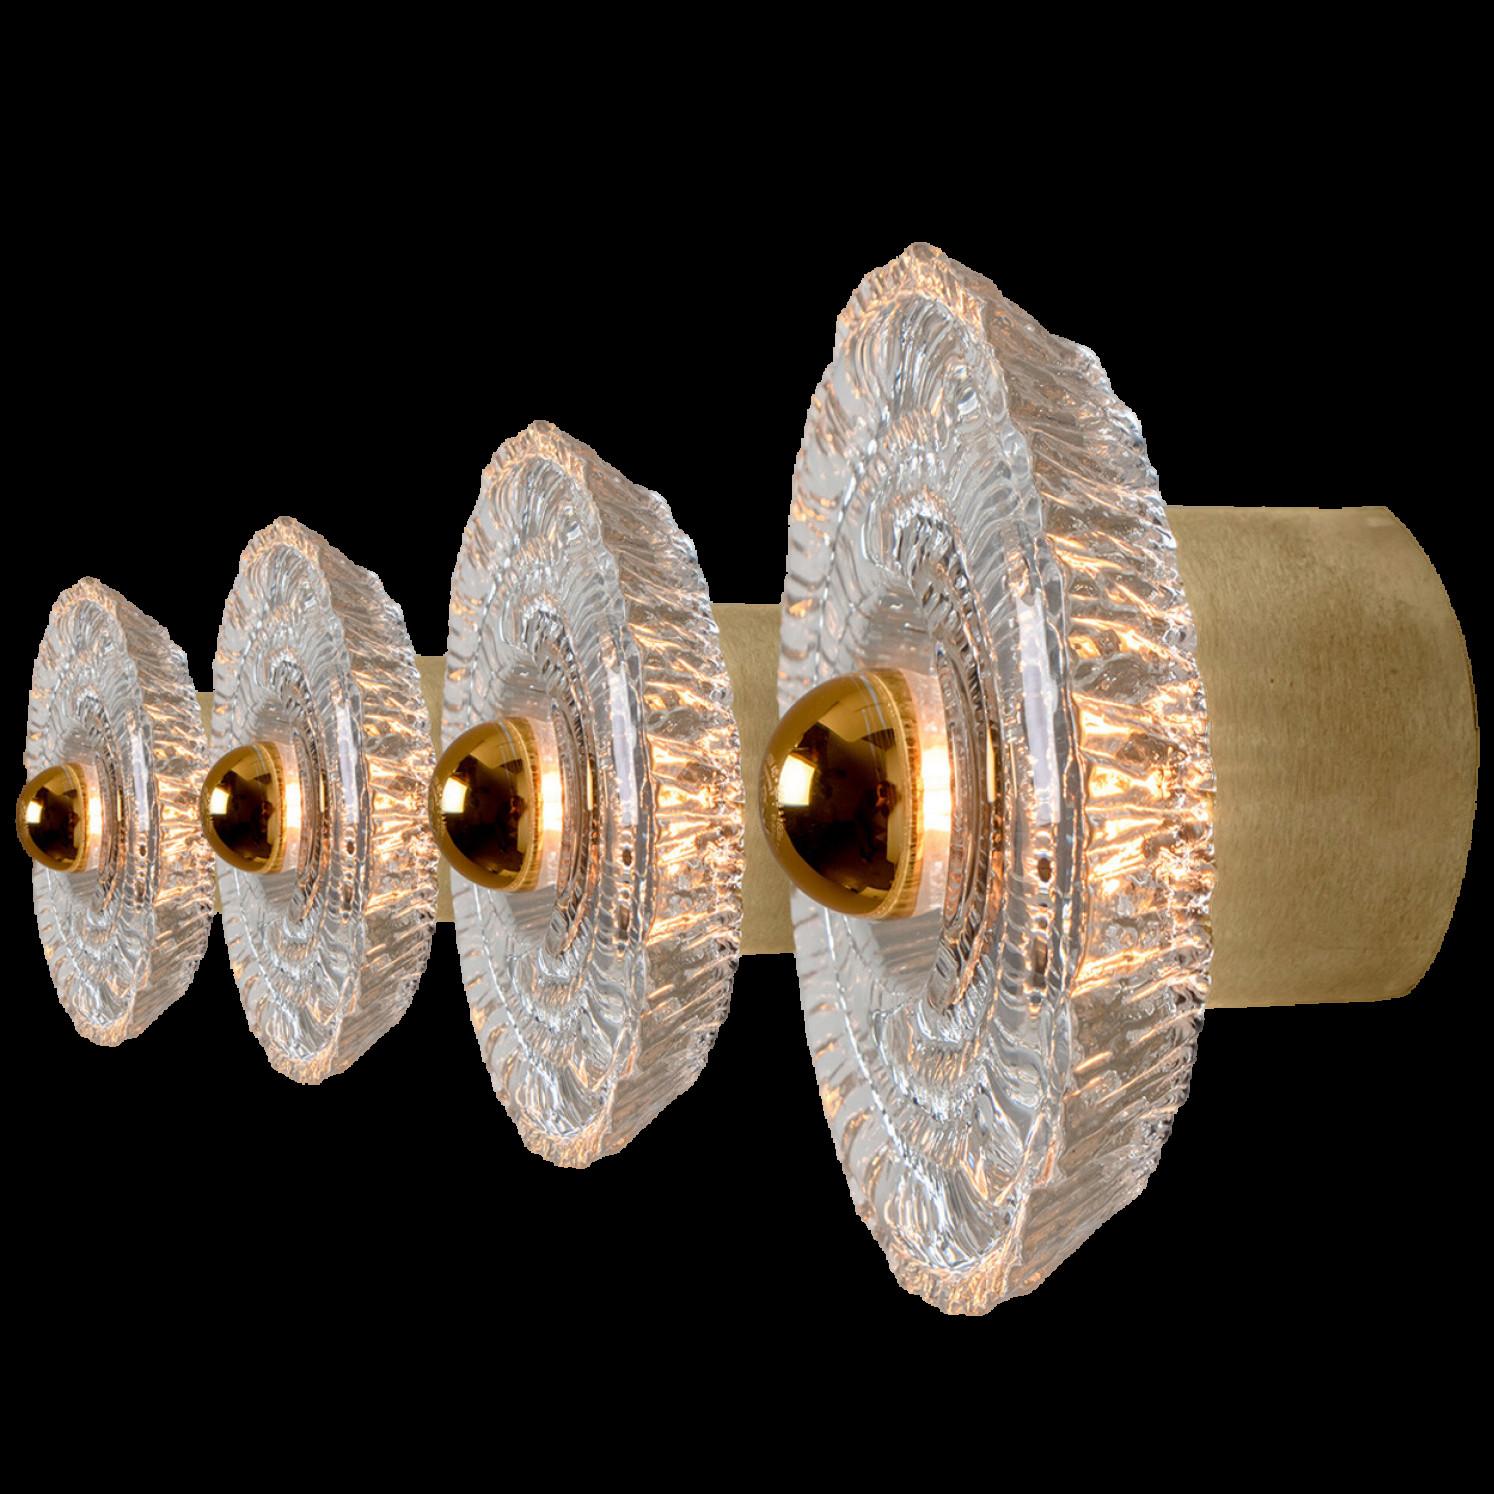 Four beautiful mid-20th century wall lights by Peill & Putzler. Made around 1970 in Germany, Europe. Featuring a large clear glass shade with gold around it. The light illuminates wonderful.

The lights can also be used as flush mounts.

Please note